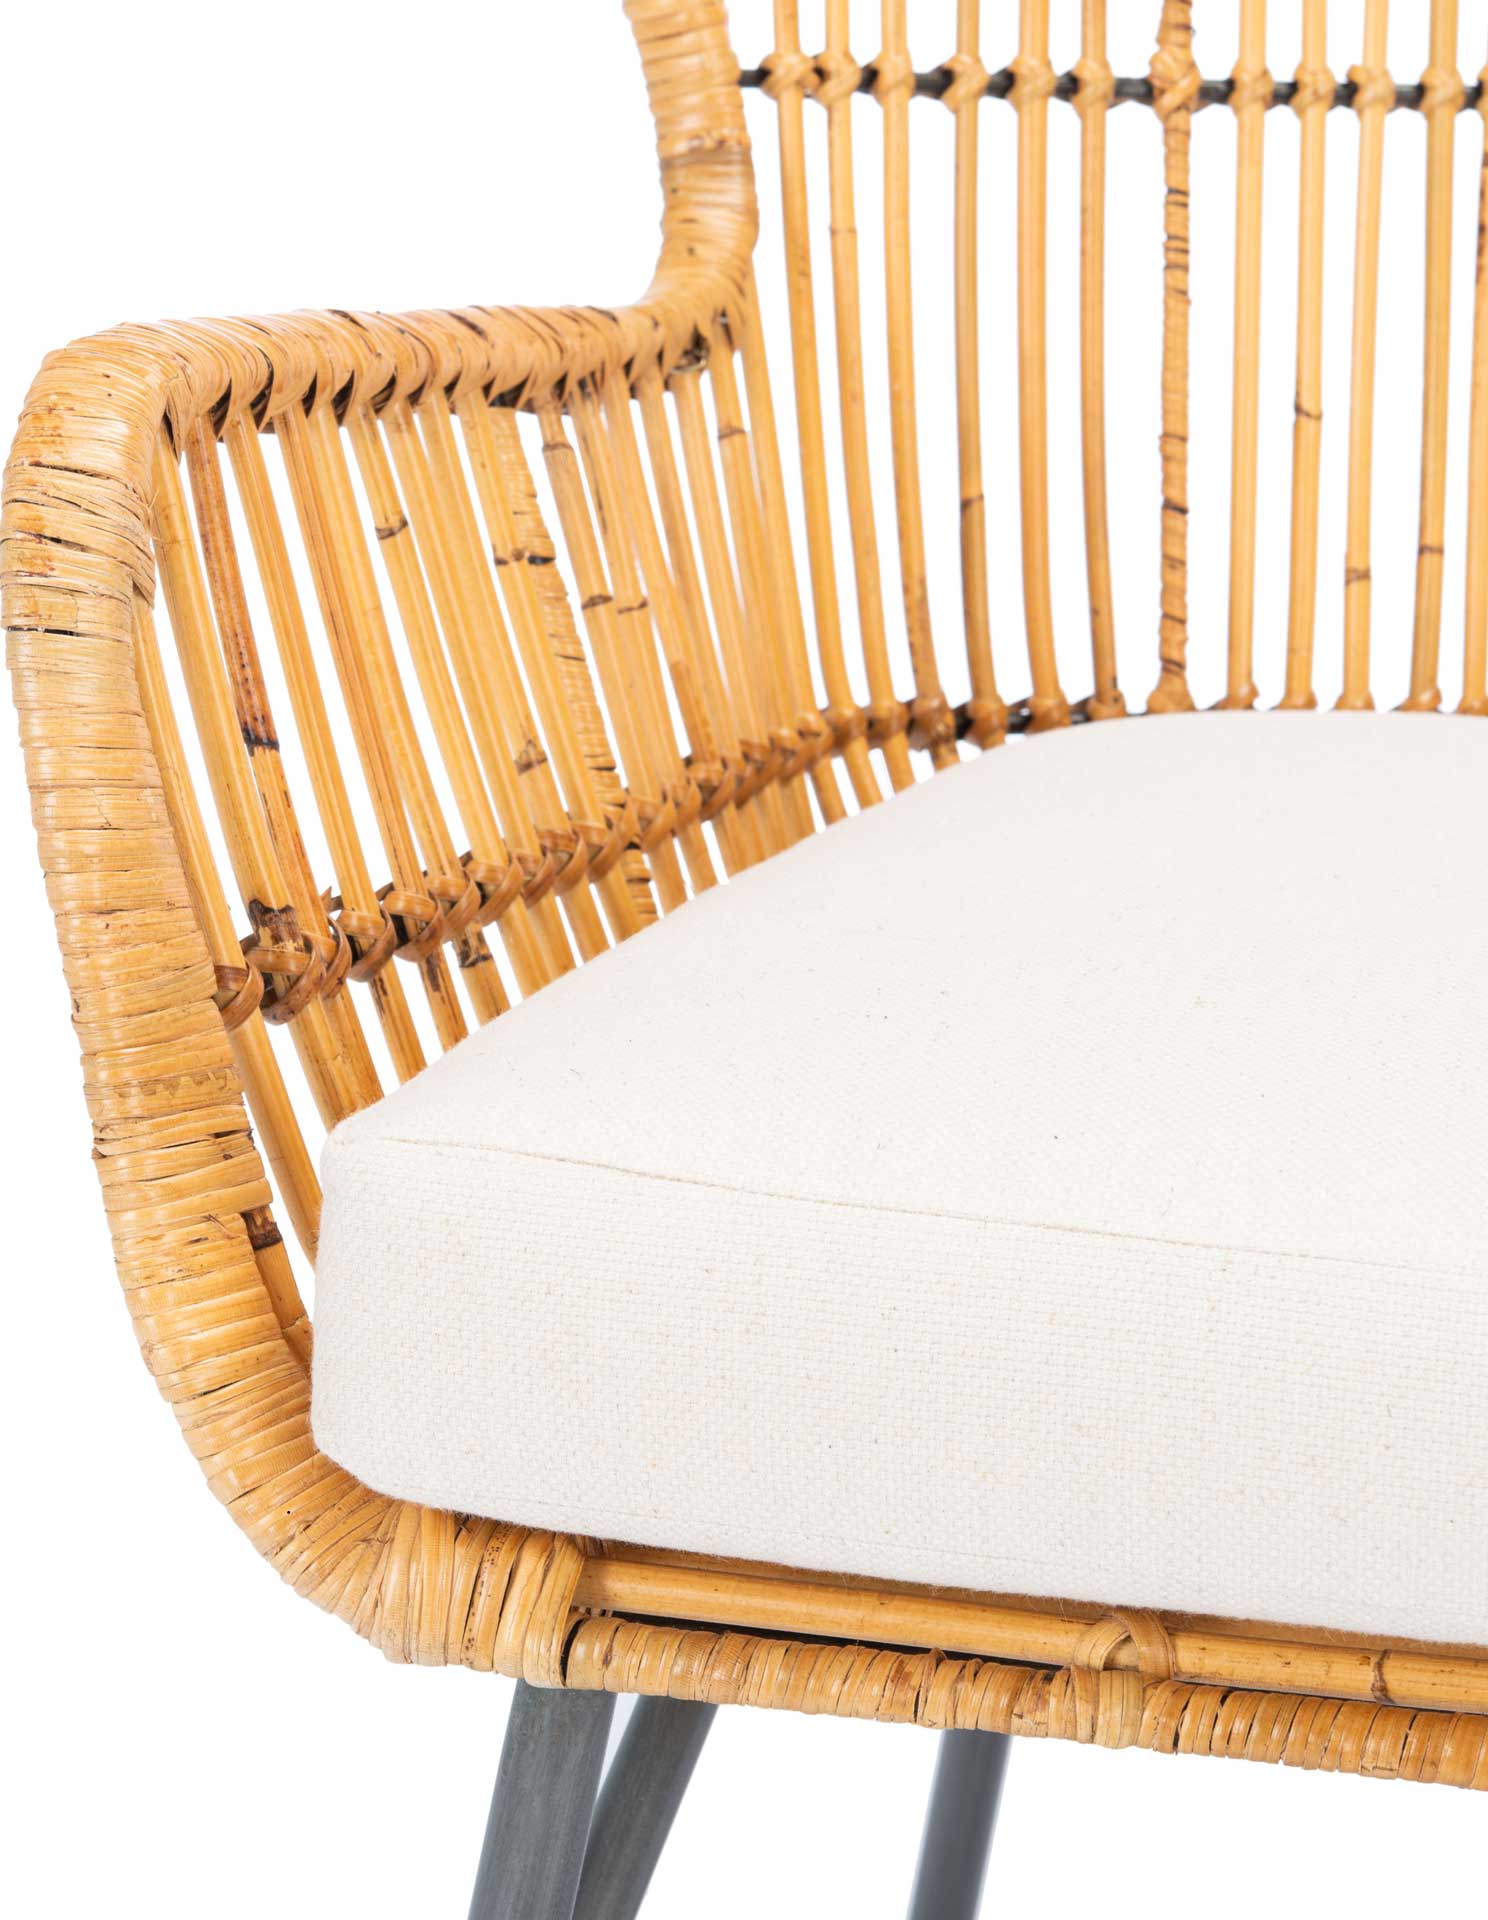 Leary Rattan Accent Chair Natural/White/Black